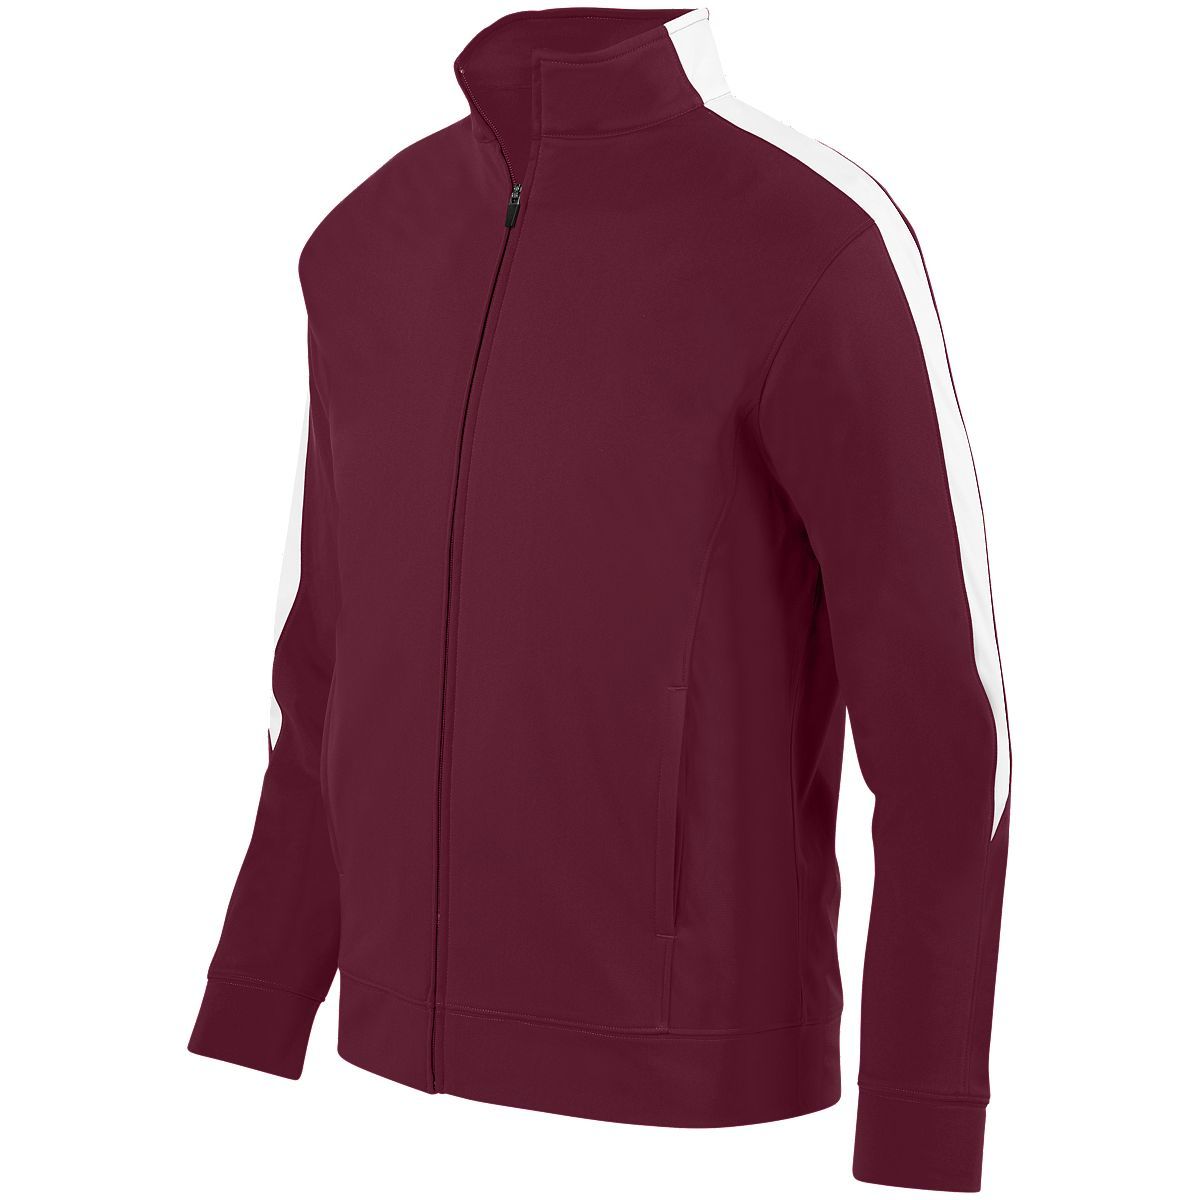 Augusta Sportswear Medalist Jacket 2.0 in Maroon/White  -Part of the Adult, Adult-Jacket, Augusta-Products, Outerwear product lines at KanaleyCreations.com